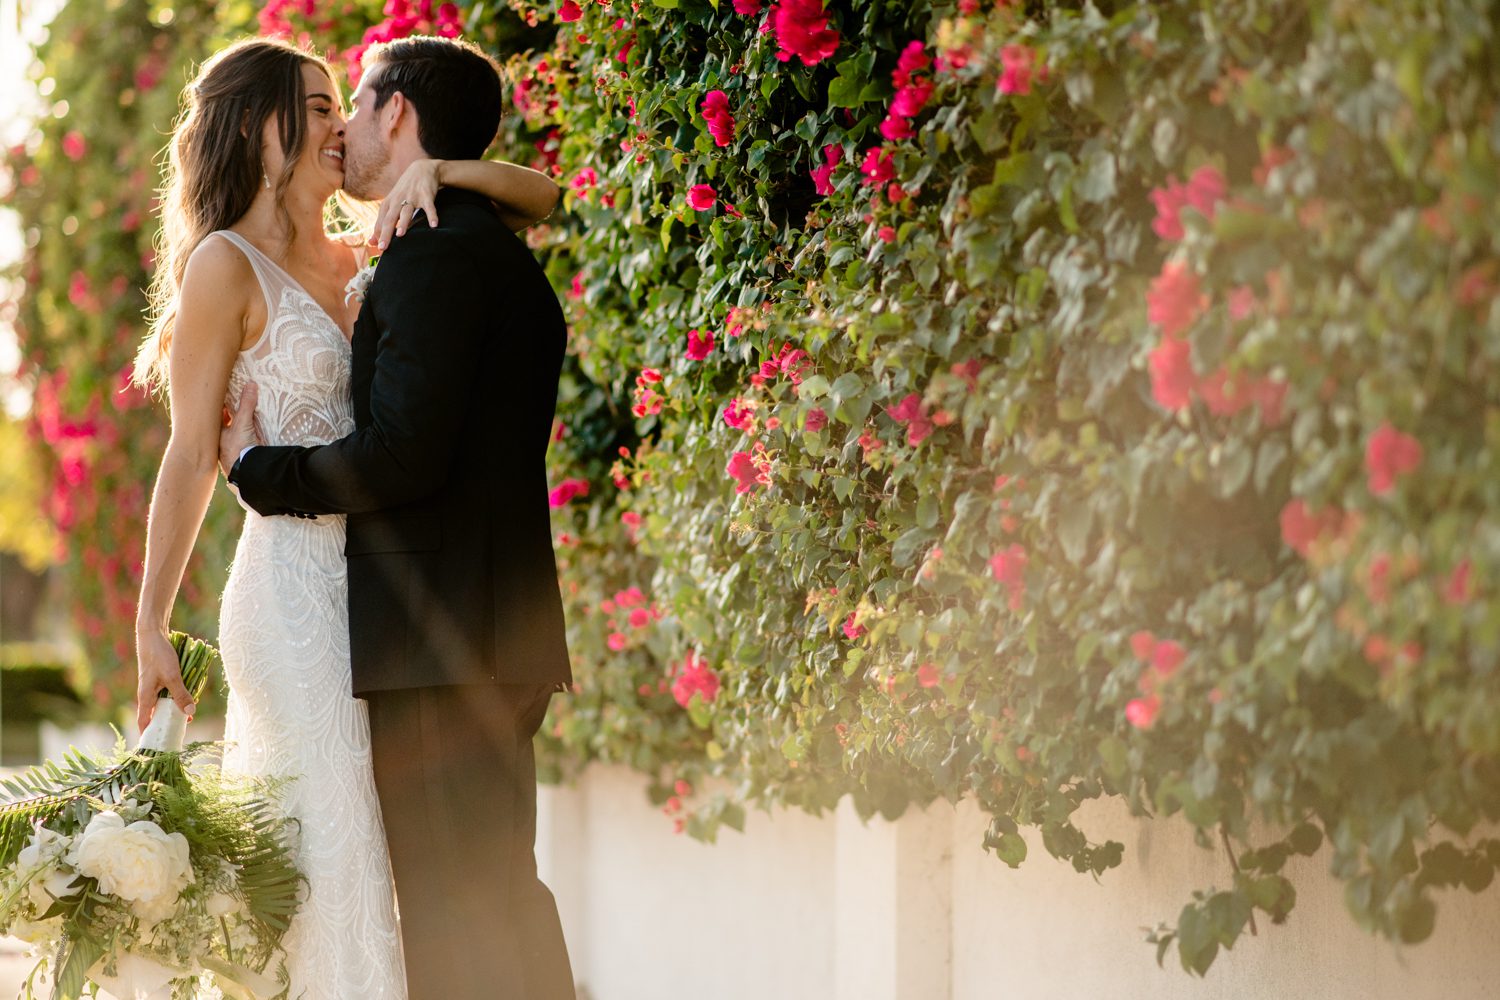 A Shana and Patrick's wedding at Hemingway House features a kiss in front of a flower wall.